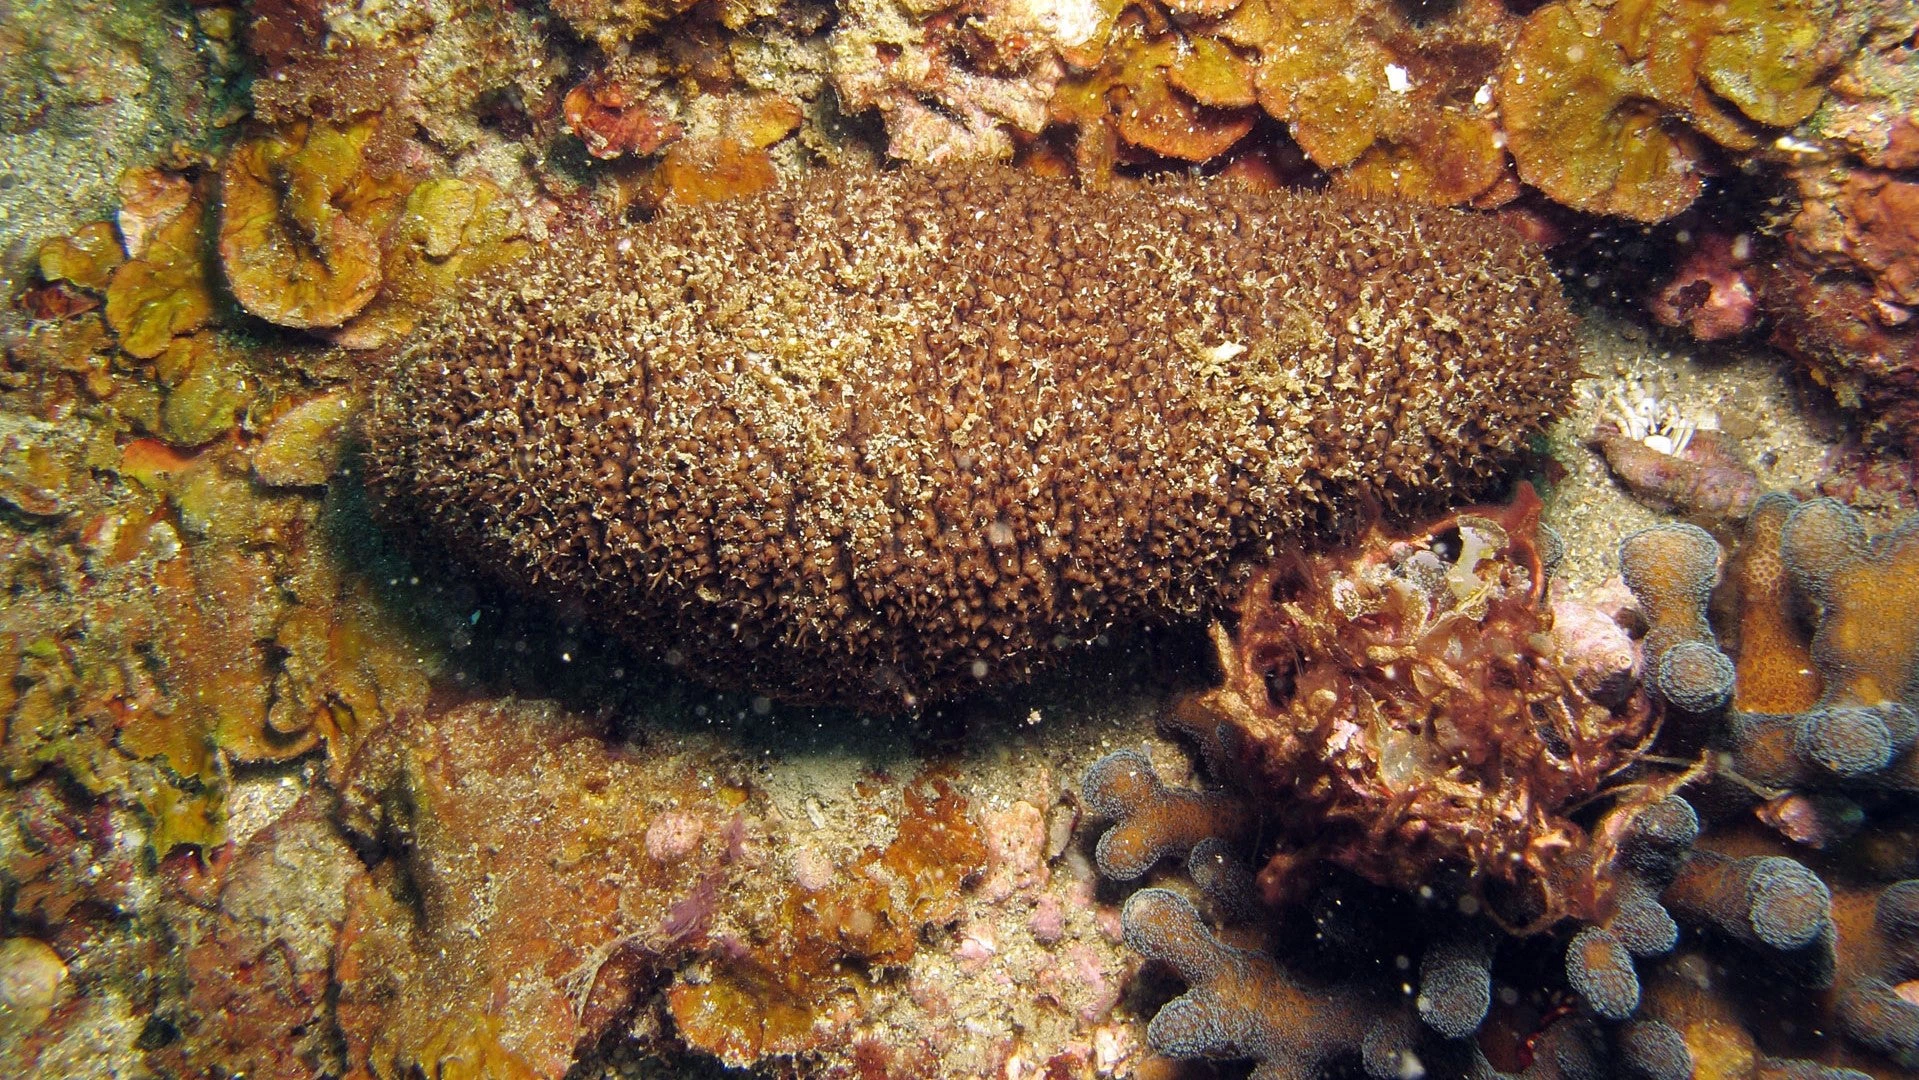 Sea cucumber. Commonly known as beche-de-mer or teripang